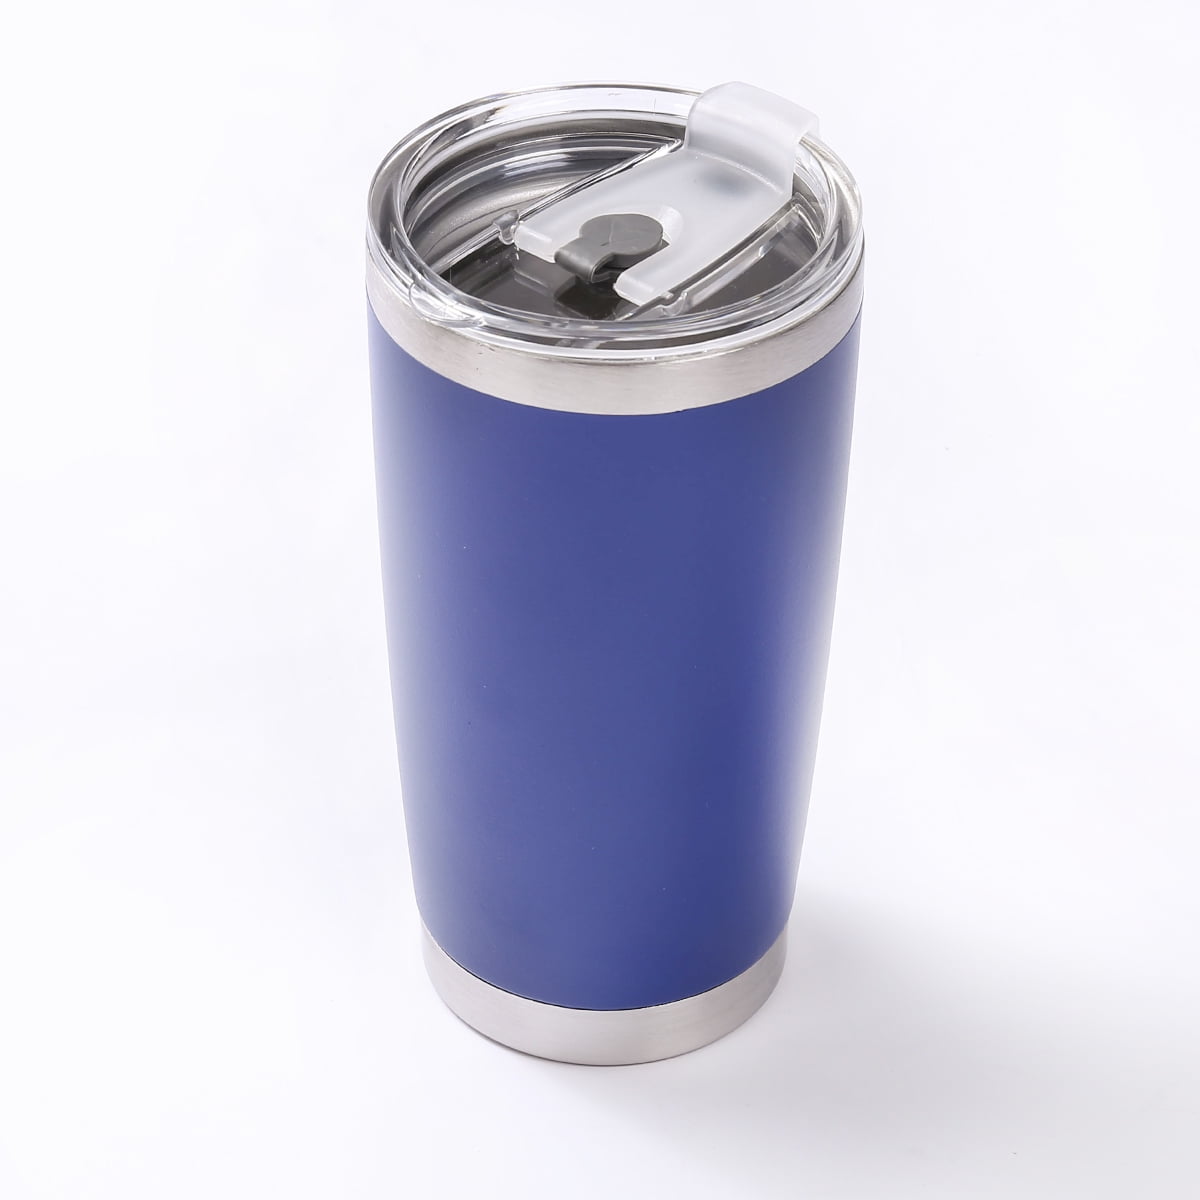  LeMardi Stainless Steel Insulated Flask Thermos with 3  Attachable Mugs- Perfect for Travel, Work, Picnics, Coffee, & Tea (Hot/Cold  for 12 Hours) (BLUE): Home & Kitchen